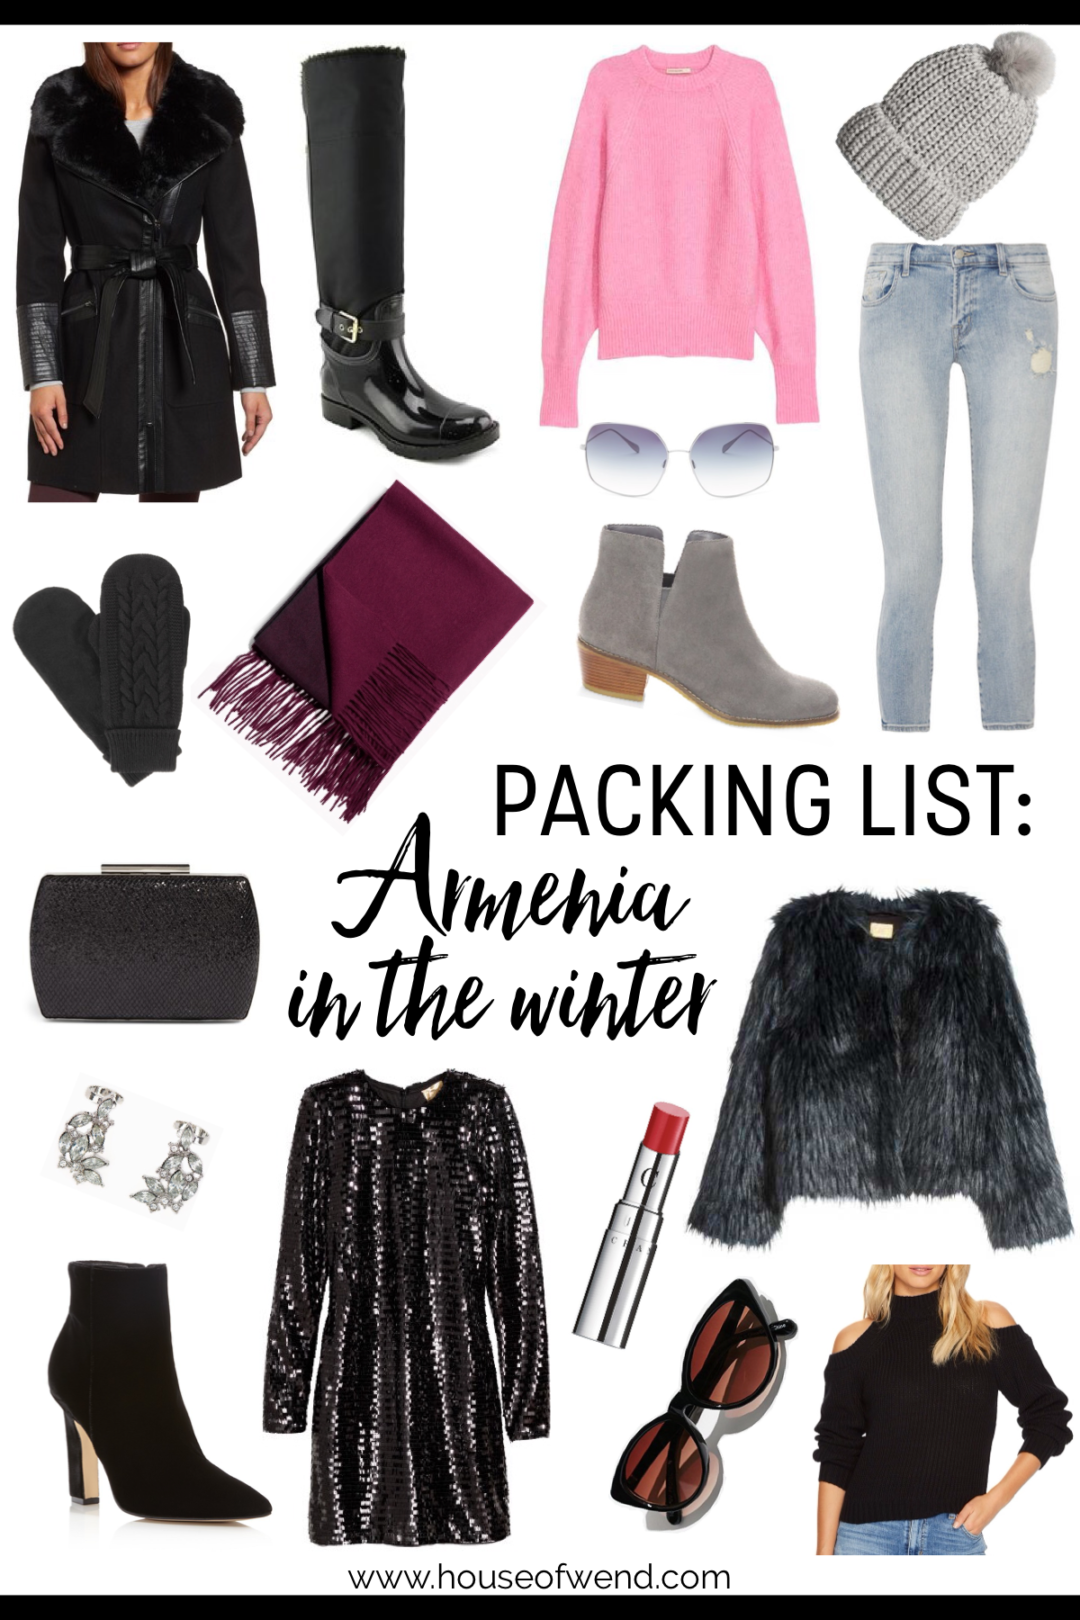 Packing list for Armenia in the winter